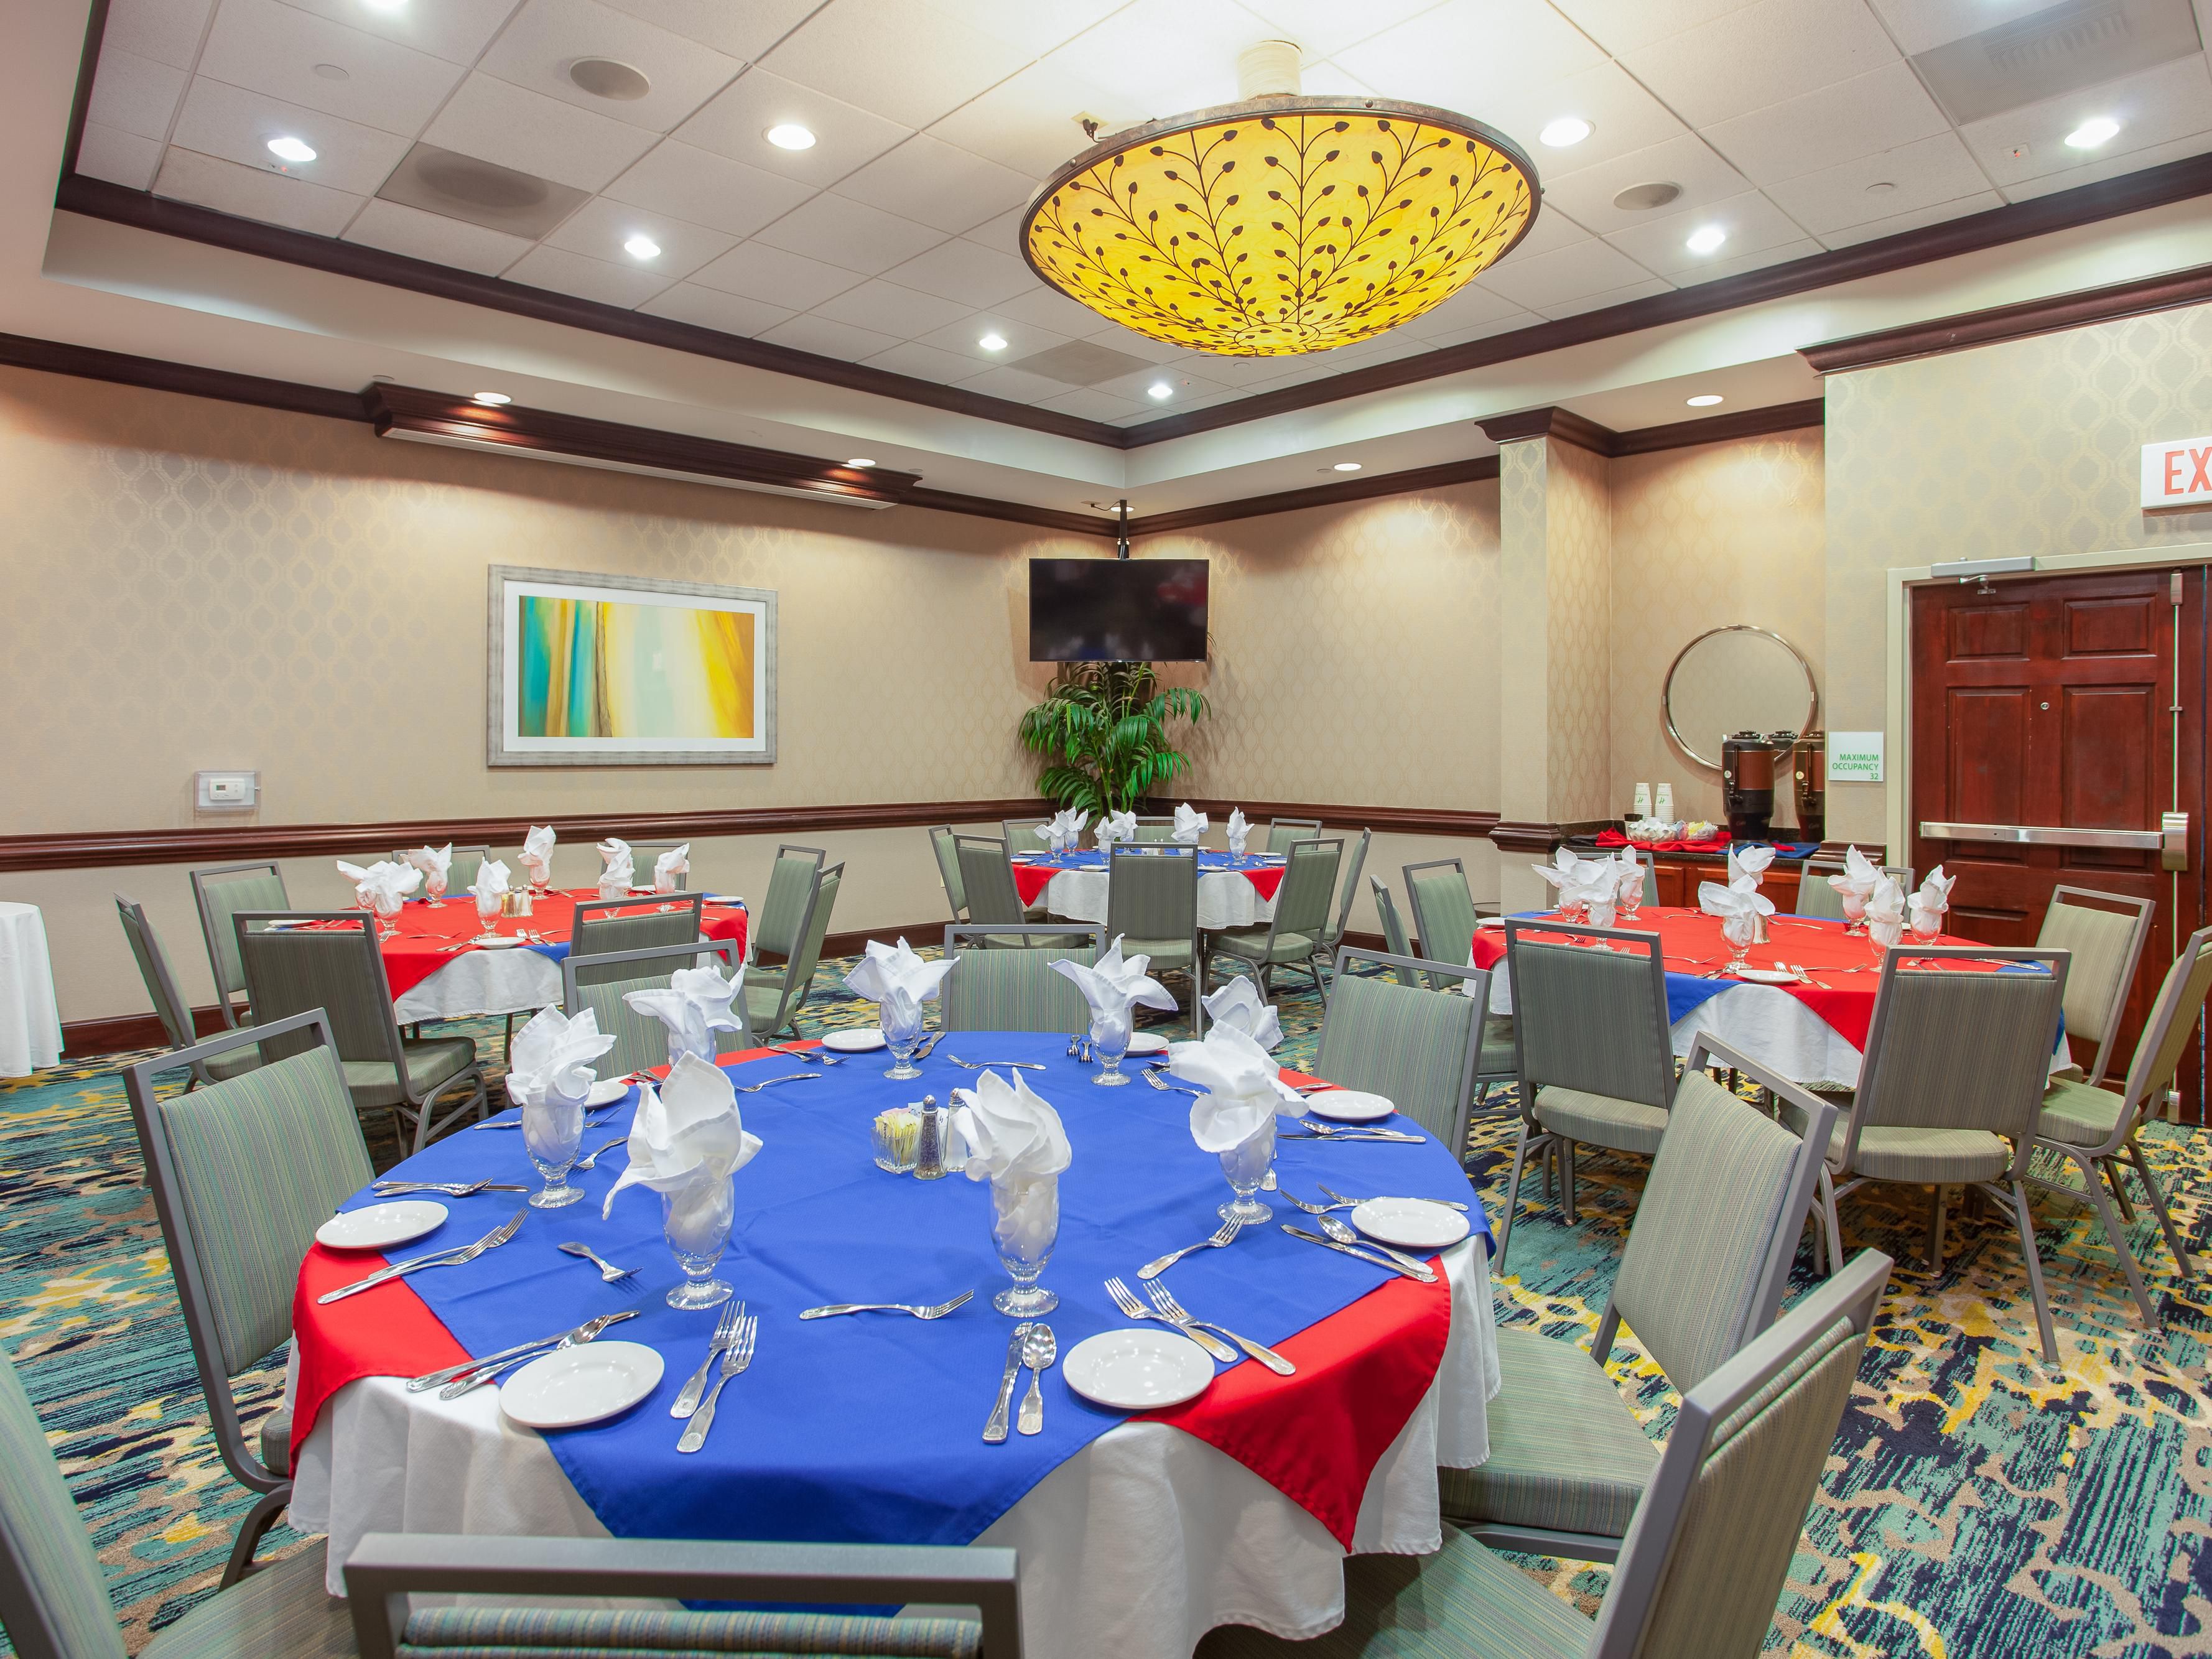 Plan your next business or social event at our full service hotel. From conferences and seminars to weddings and family reunions, our team will ensure a successful event.  Our expert catering and banquet staff will handle all of your dining requests.  
